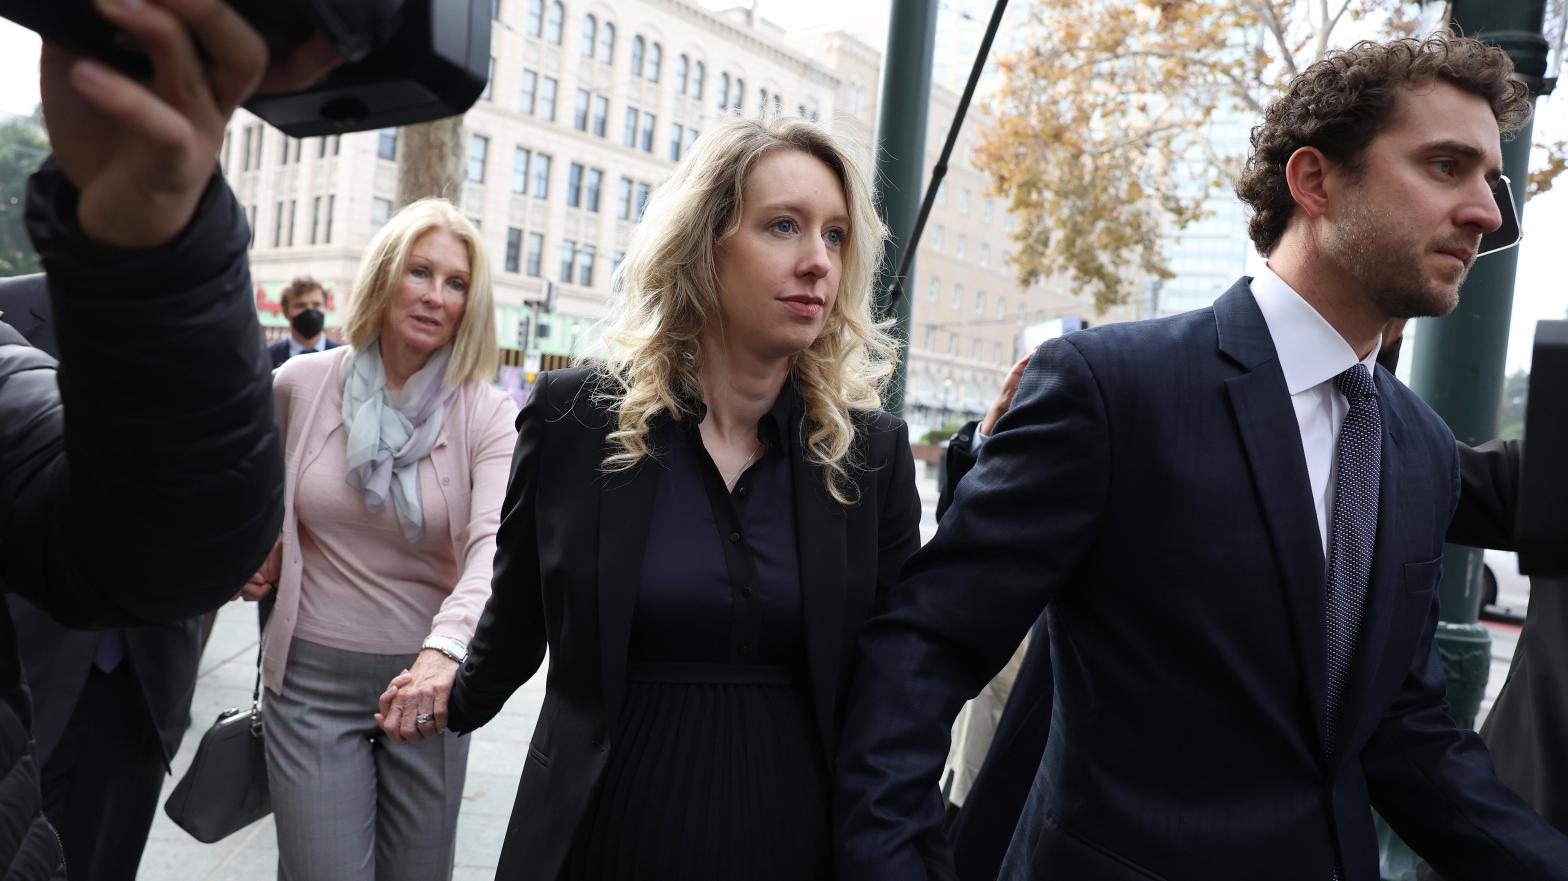 Theranos CEO Elizabeth Holmes, centre, walking into court surrounded by her mother Noel Holmes and partner Billy Evans. Holmes was sentenced in San Jose Federal Court Nov. 18. (Photo: Justin Sullivan, Getty Images)